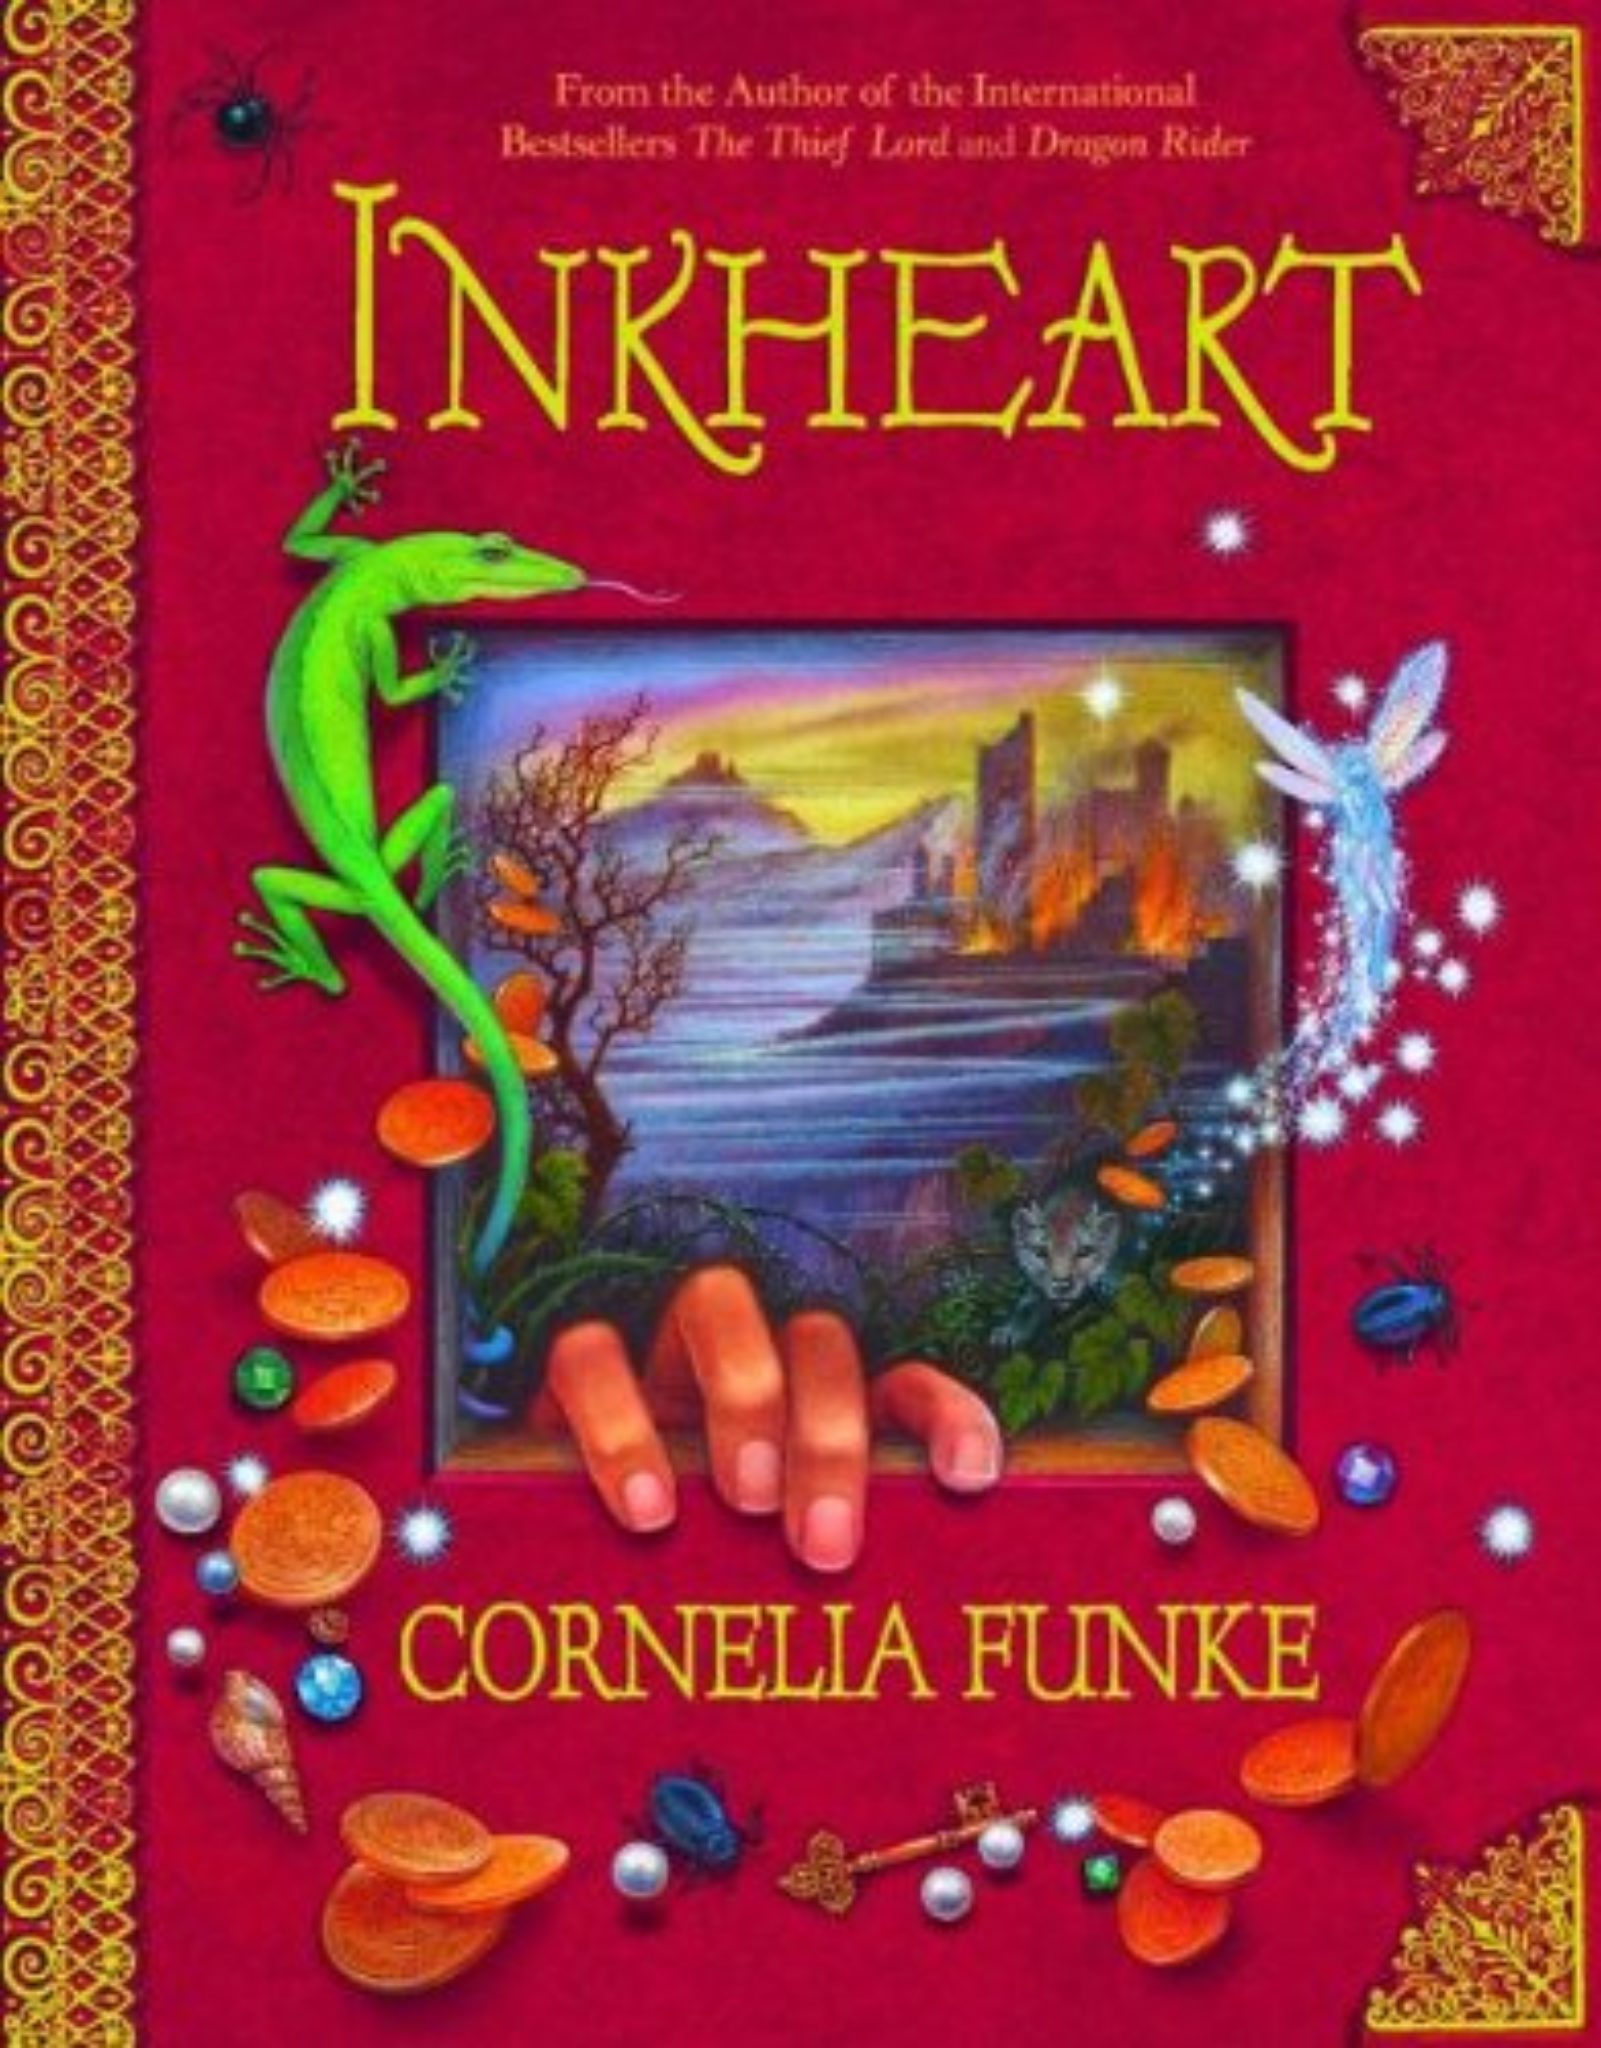 inkheart book